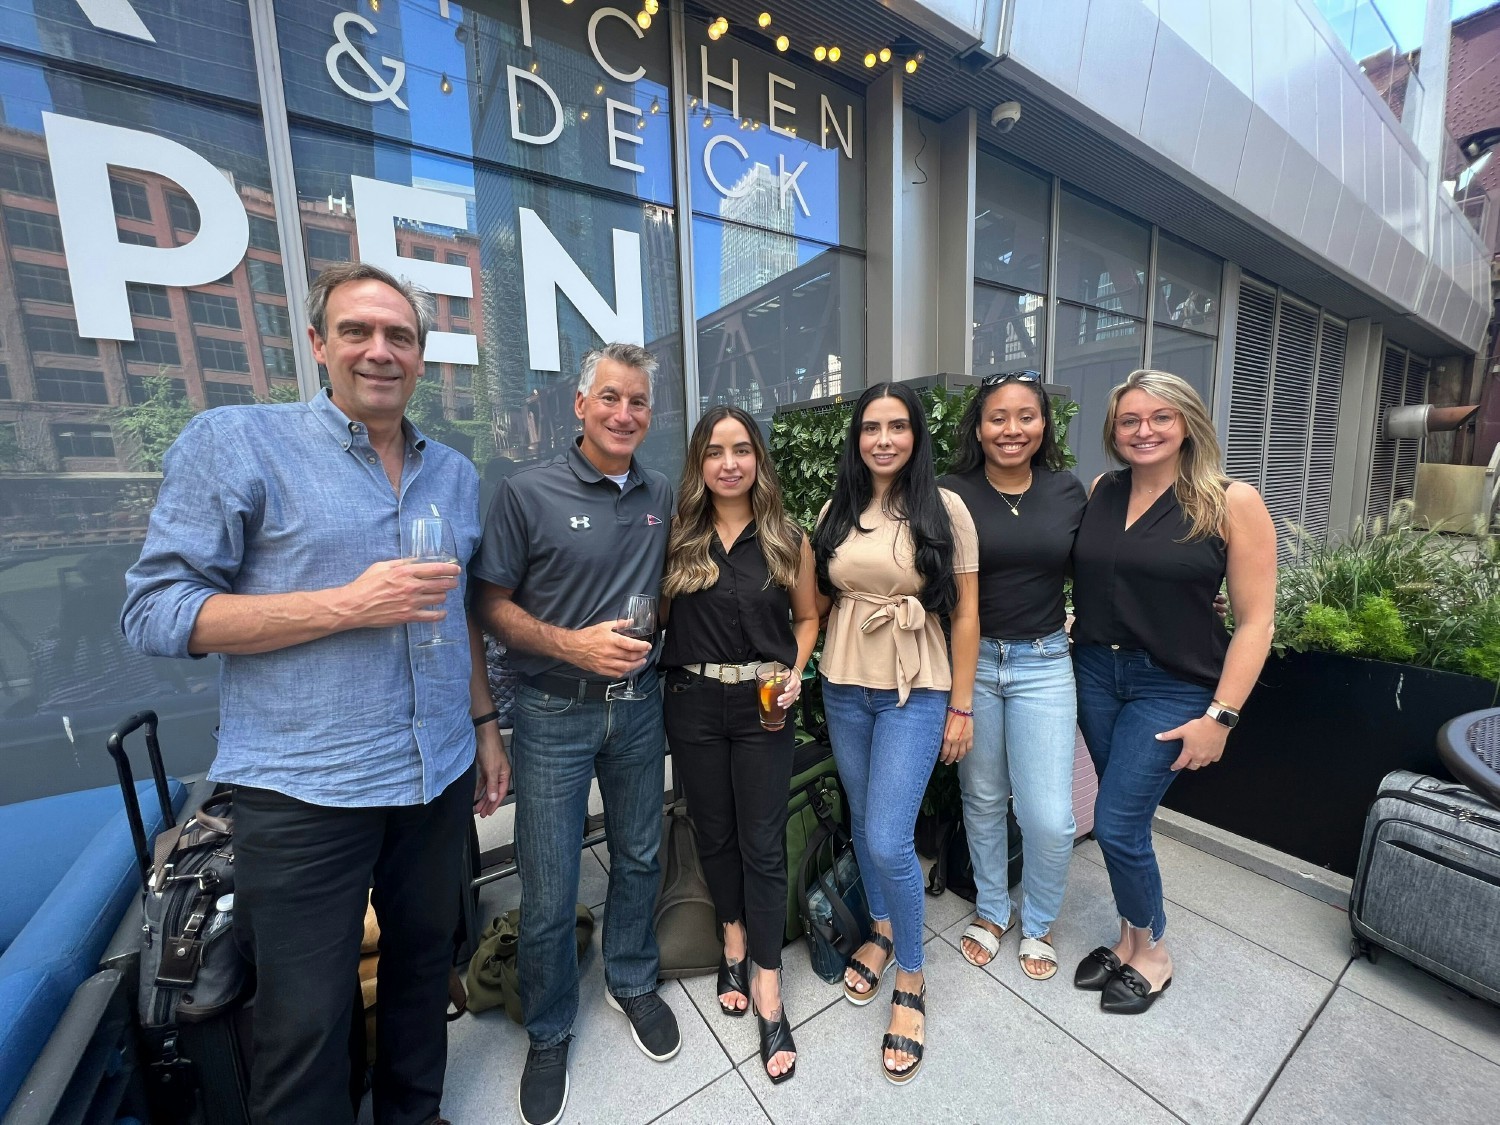 Chicago team outing